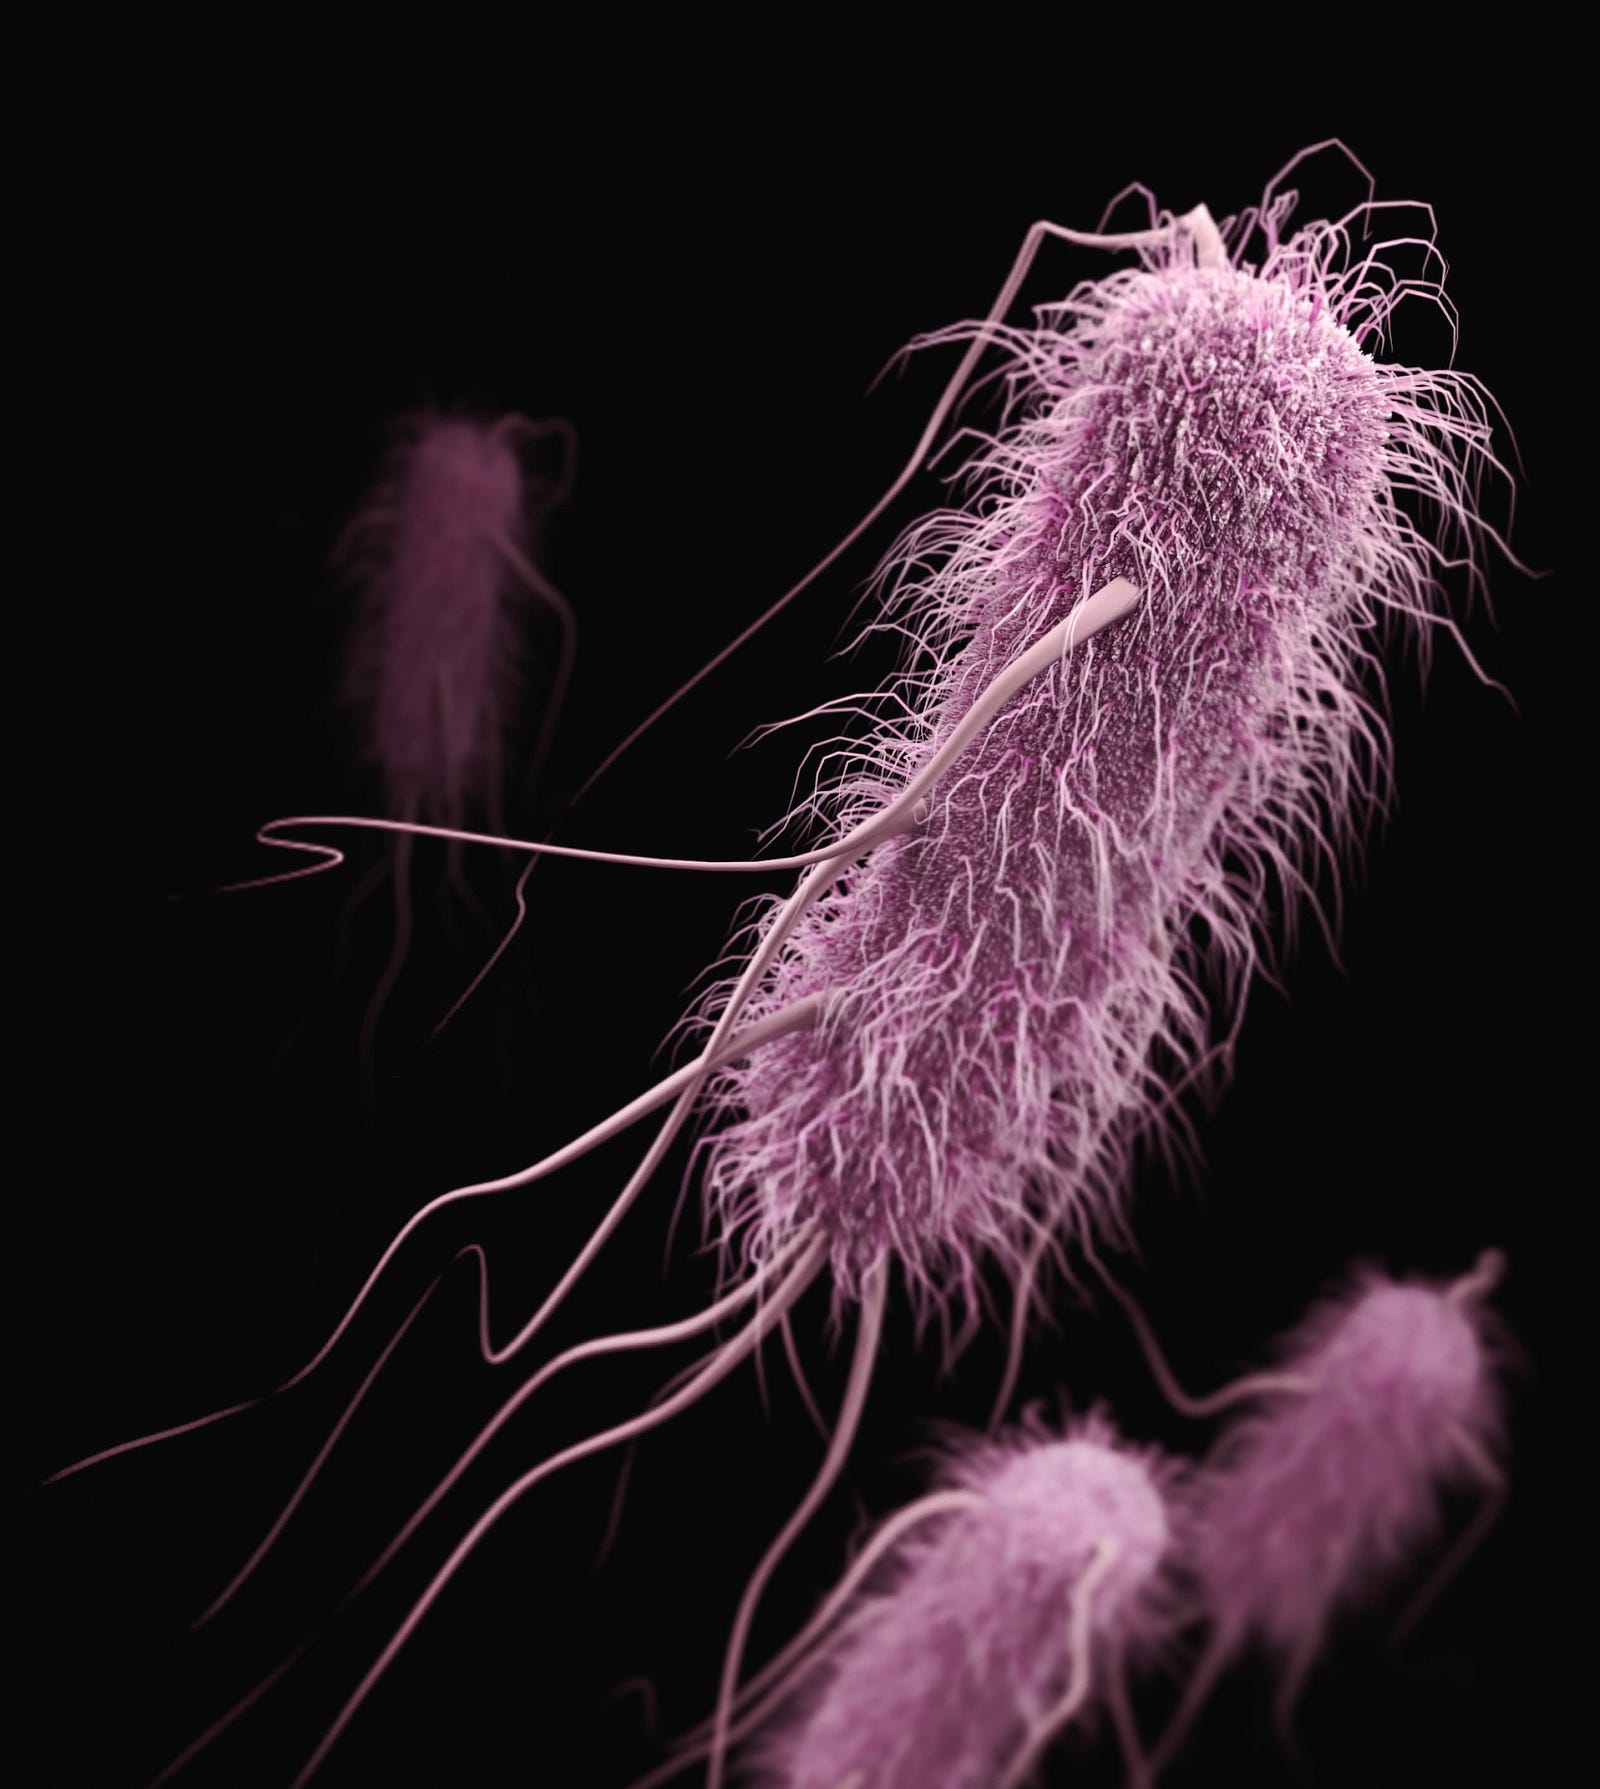 Three elongated magenta-colored microbes, with flagella protruding. The Mayo Clinic (USA) explains that “superbugs are strains of bacteria, viruses, parasites, and fungi that are resistant to most antibiotics and other medications commonly used to treat the infections they cause. A few examples of superbugs include resistant bacteria that can cause pneumonia, urinary tract infections, and skin infections.”